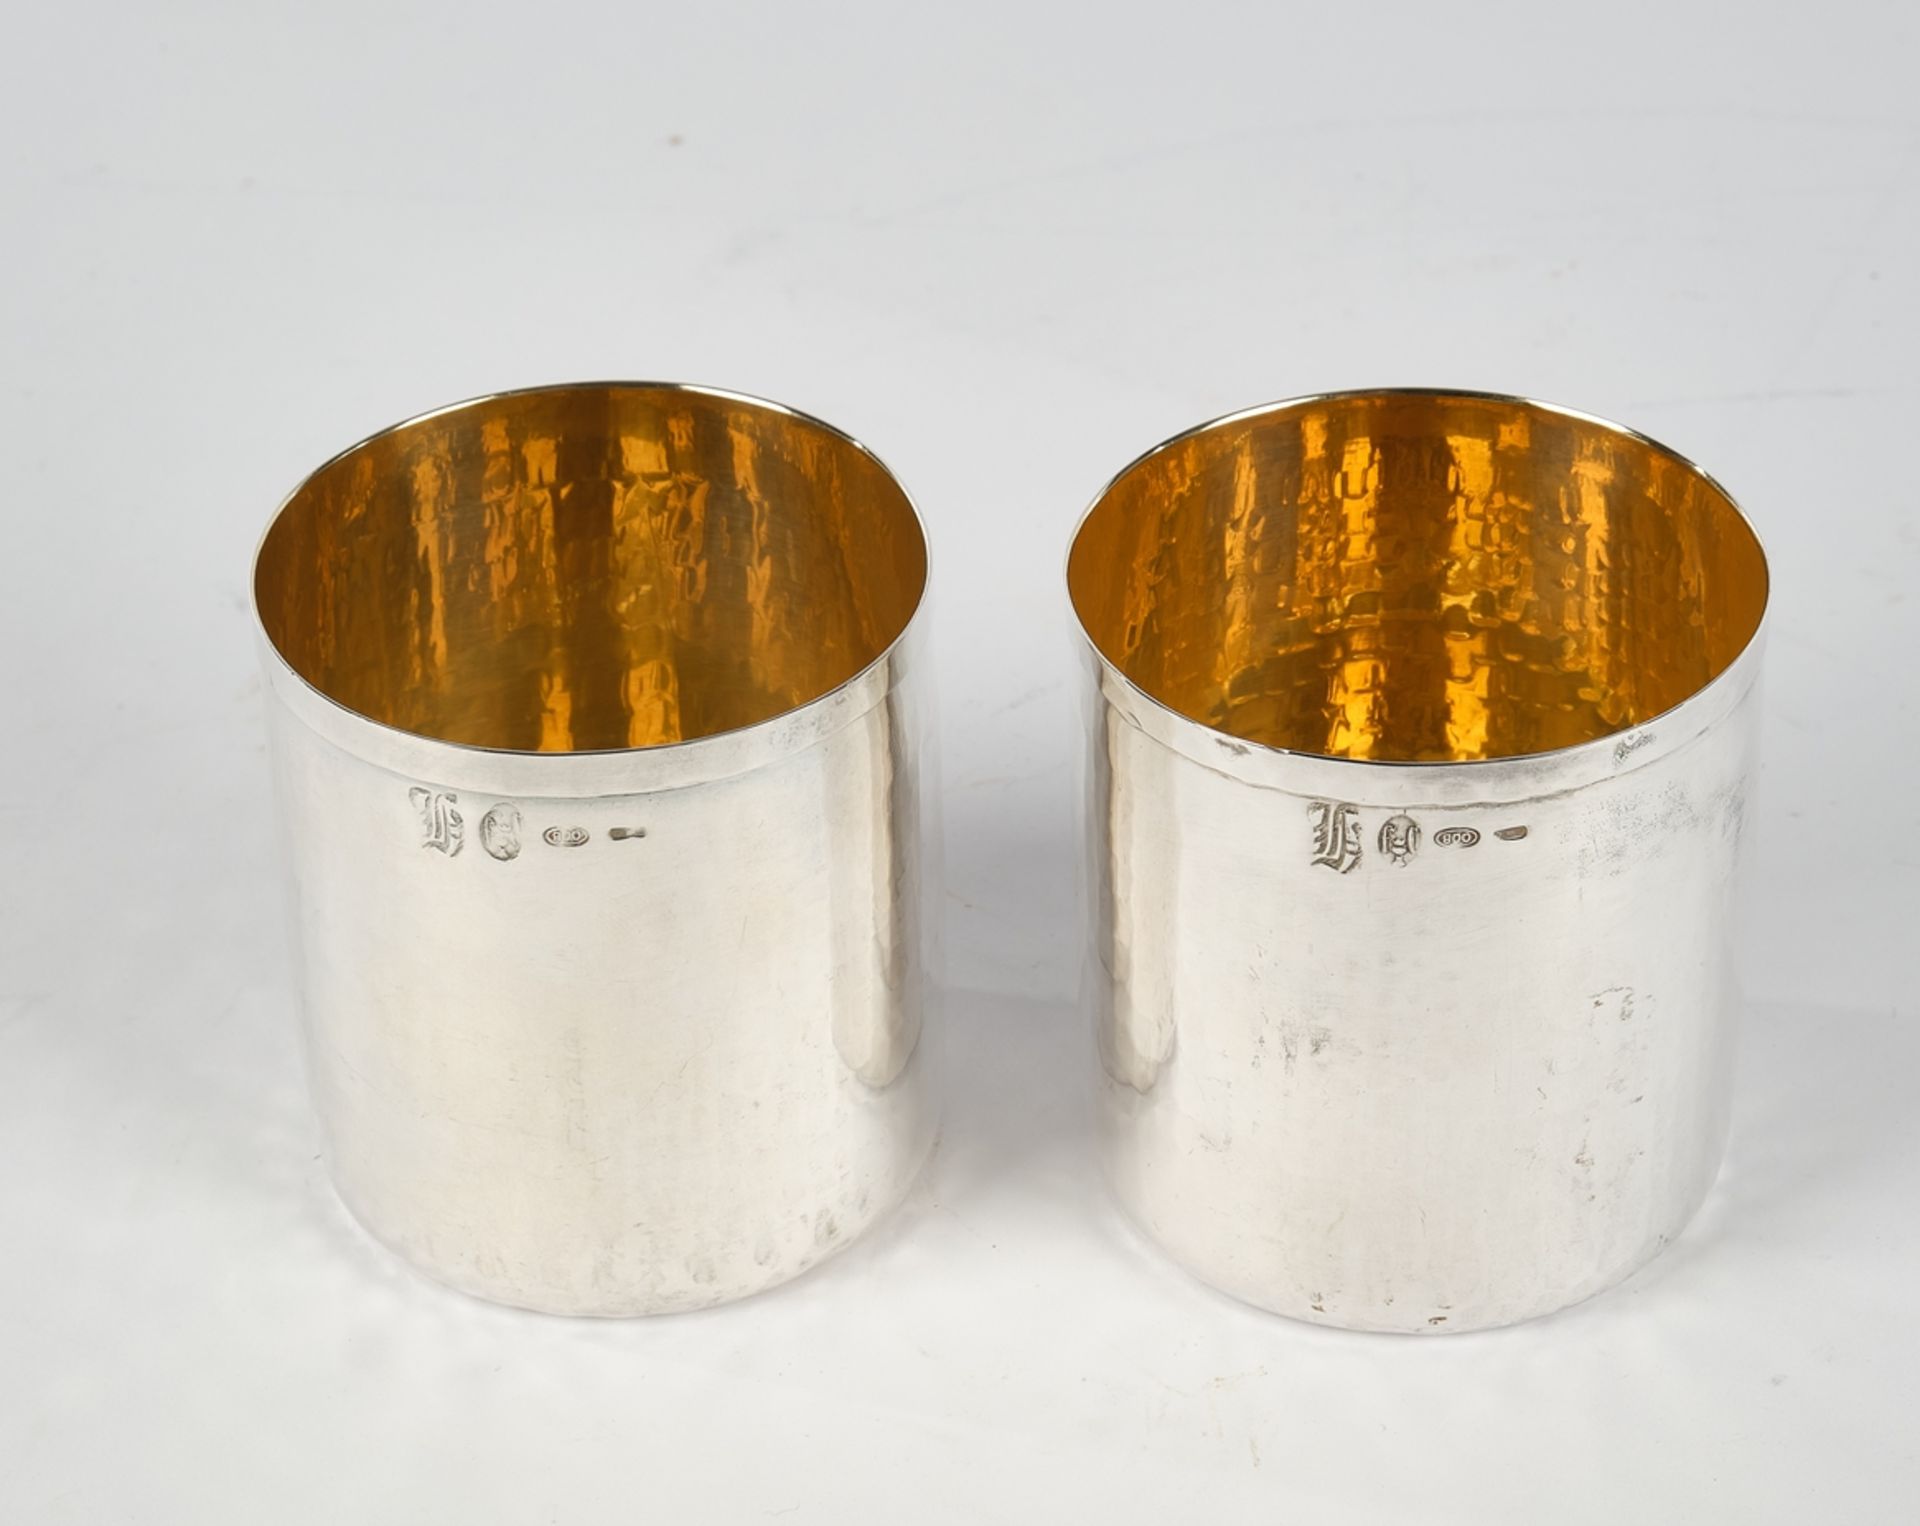 Pair of beakers, silver 800, Italy, marbled structure, gilded inside, 7.8 cm high, together approx.